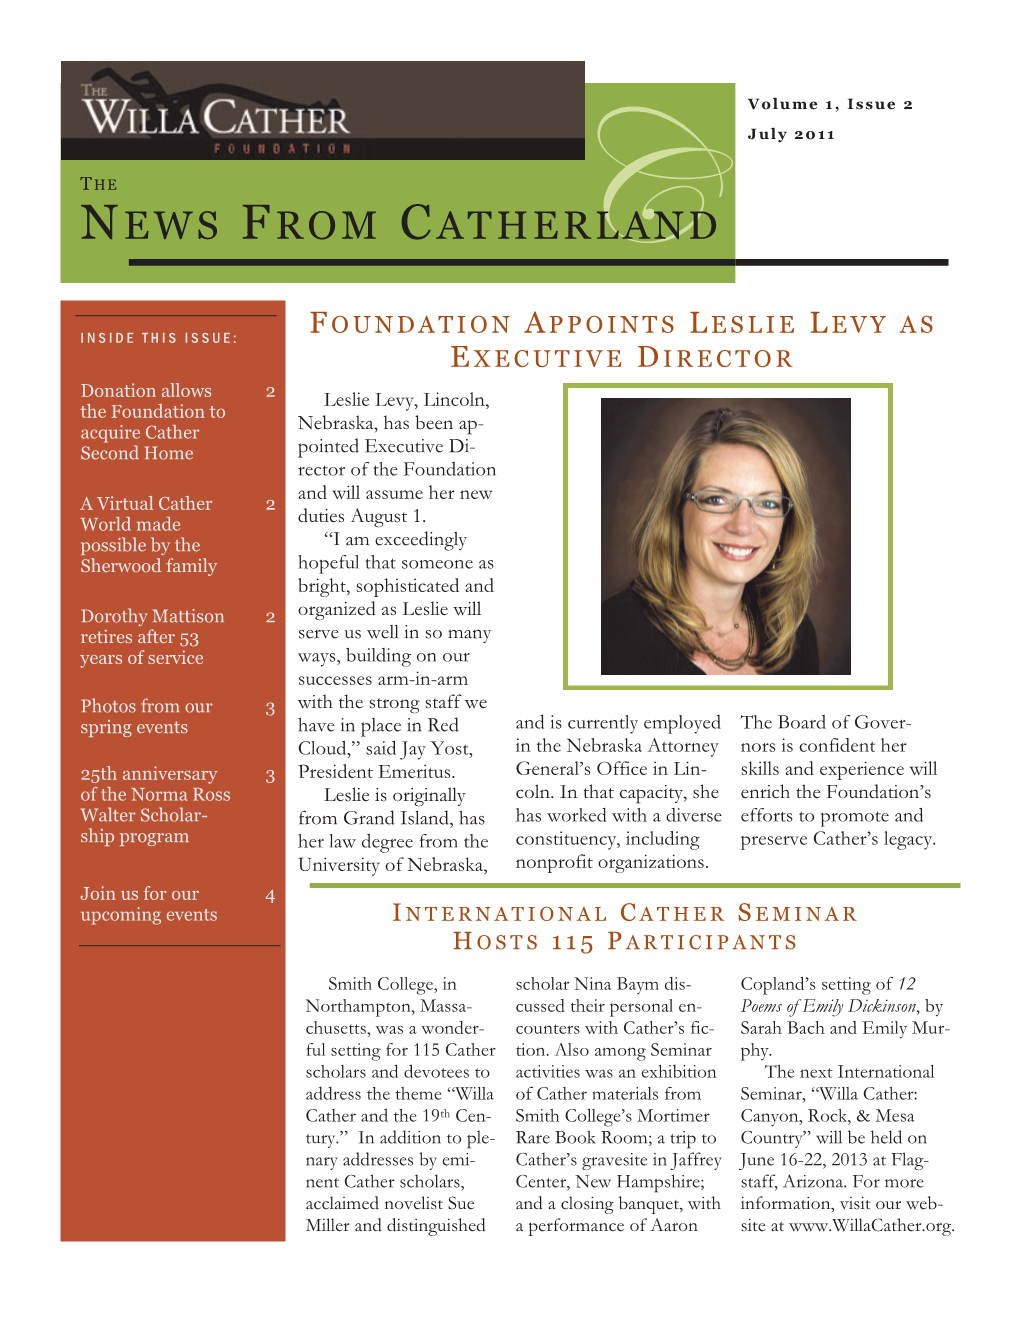 News from Catherland Pa Ge 3